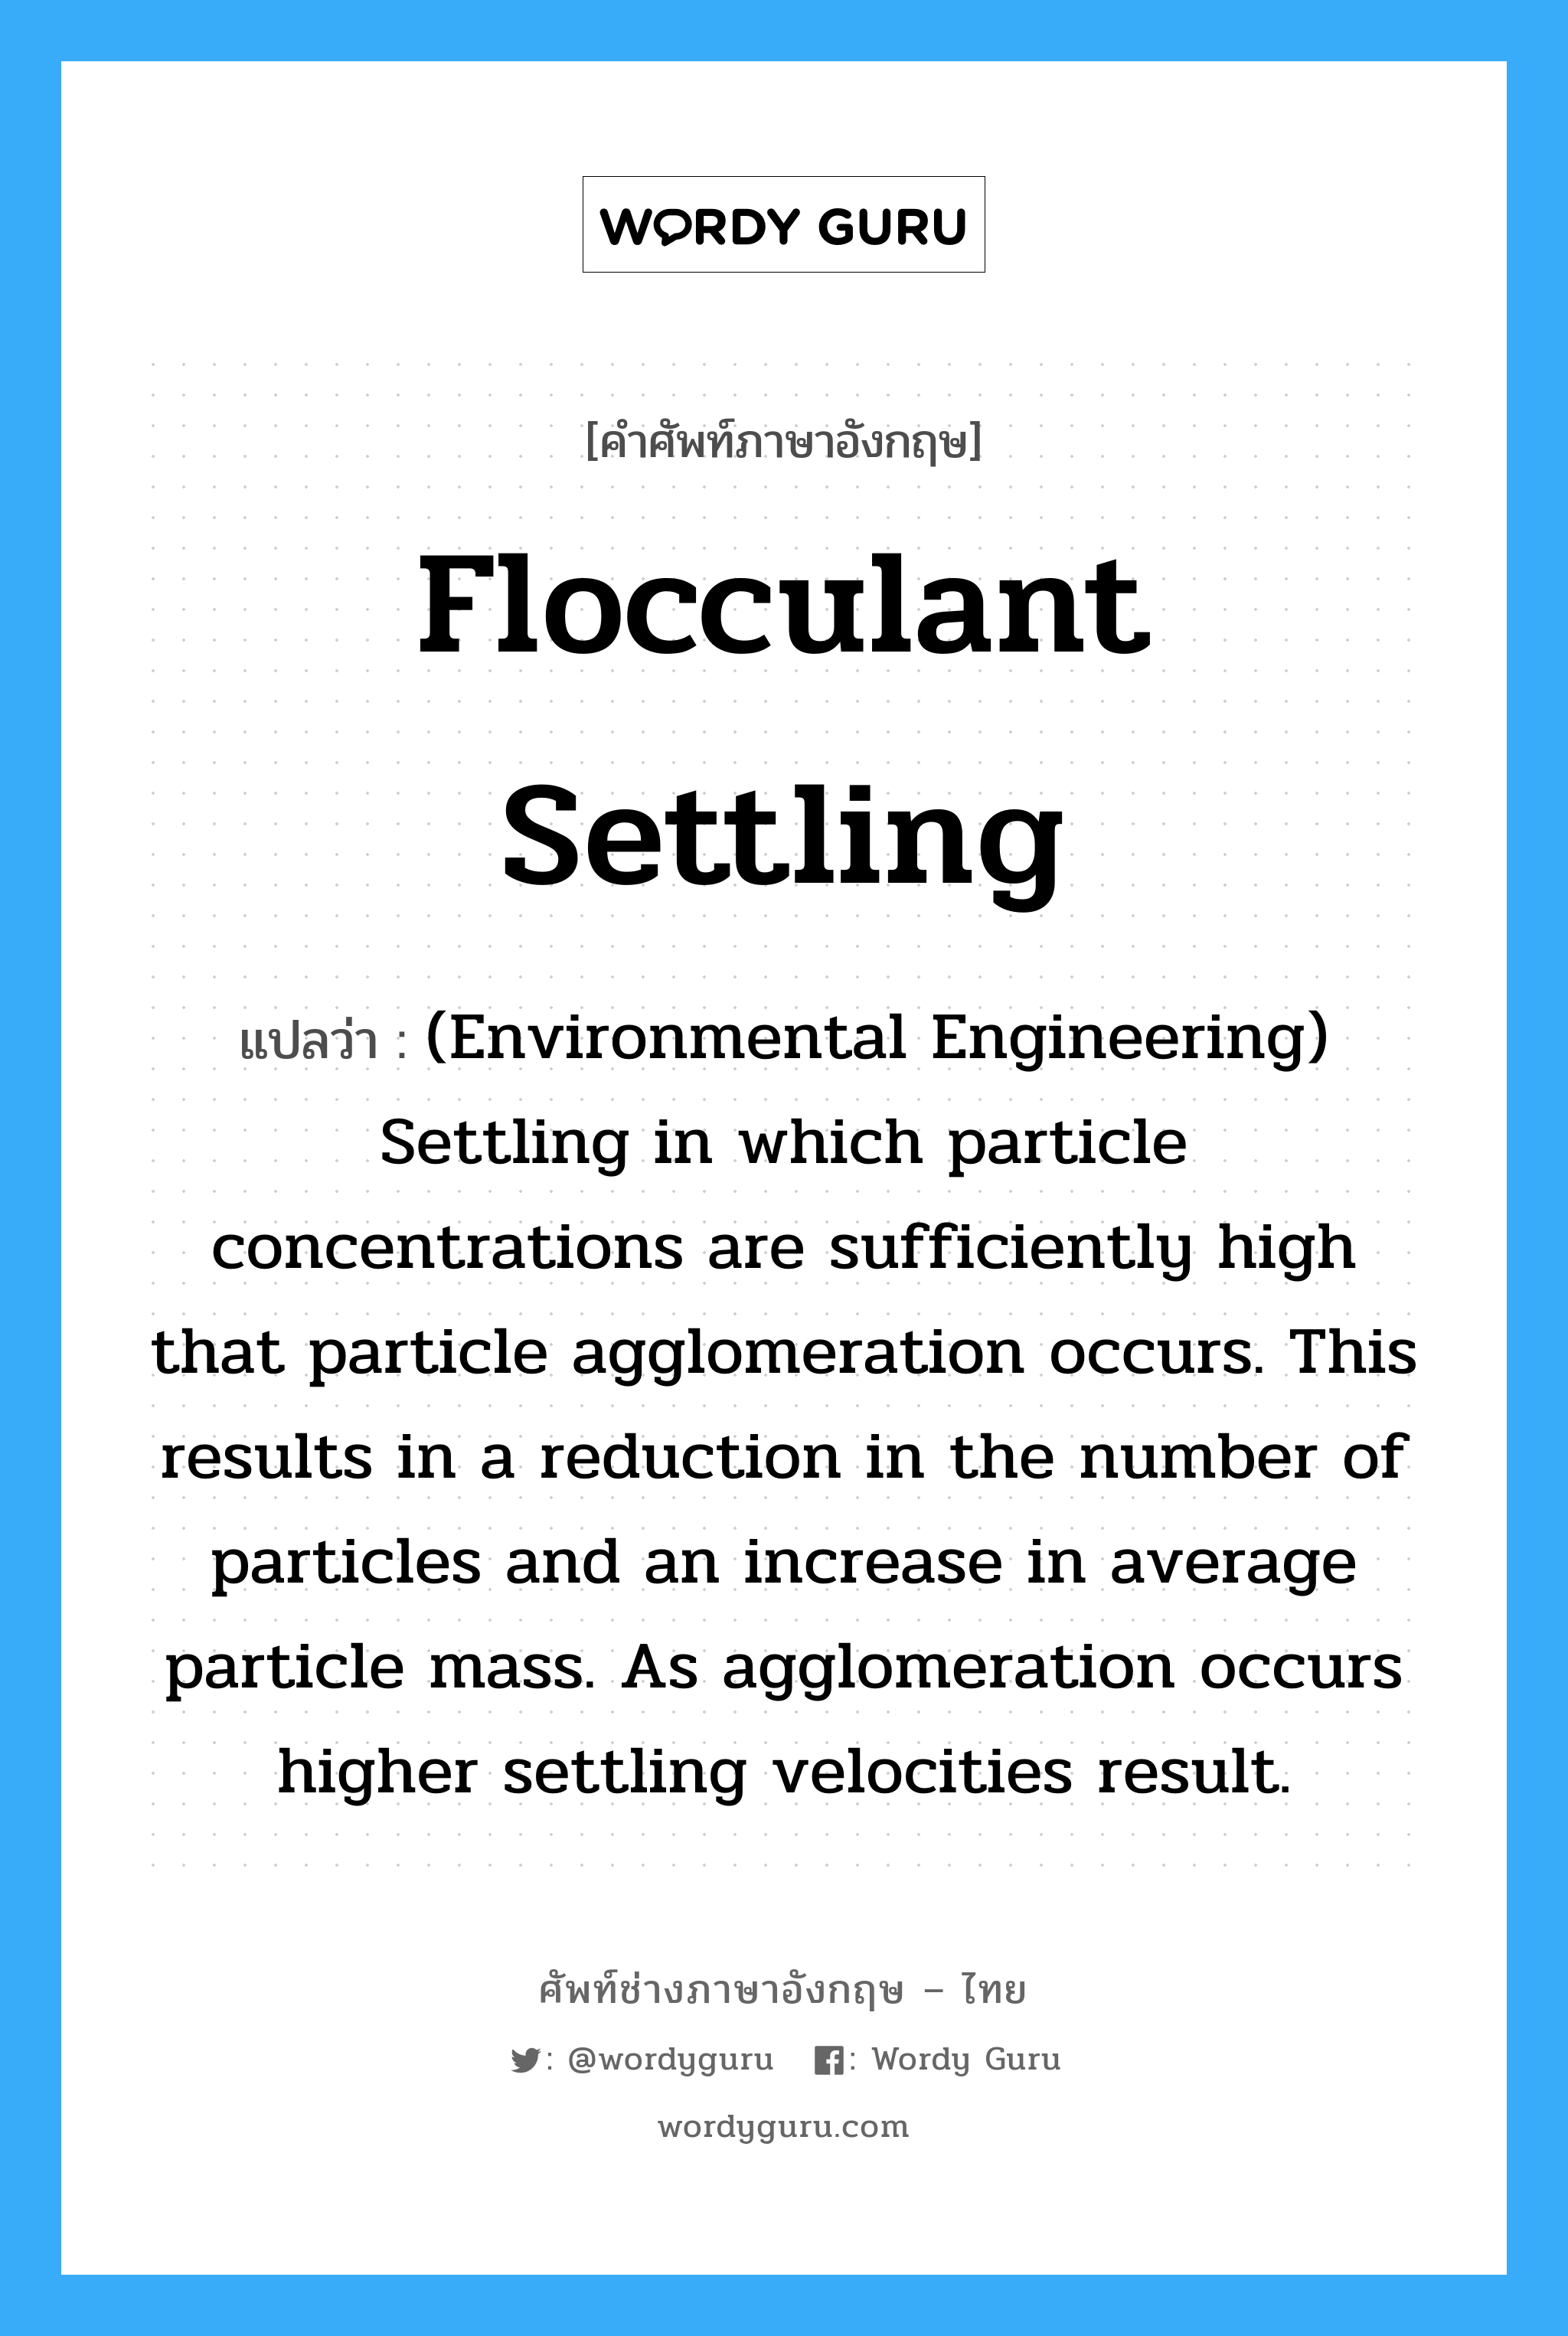 Flocculant settling แปลว่า?, คำศัพท์ช่างภาษาอังกฤษ - ไทย Flocculant settling คำศัพท์ภาษาอังกฤษ Flocculant settling แปลว่า (Environmental Engineering) Settling in which particle concentrations are sufficiently high that particle agglomeration occurs. This results in a reduction in the number of particles and an increase in average particle mass. As agglomeration occurs higher settling velocities result.